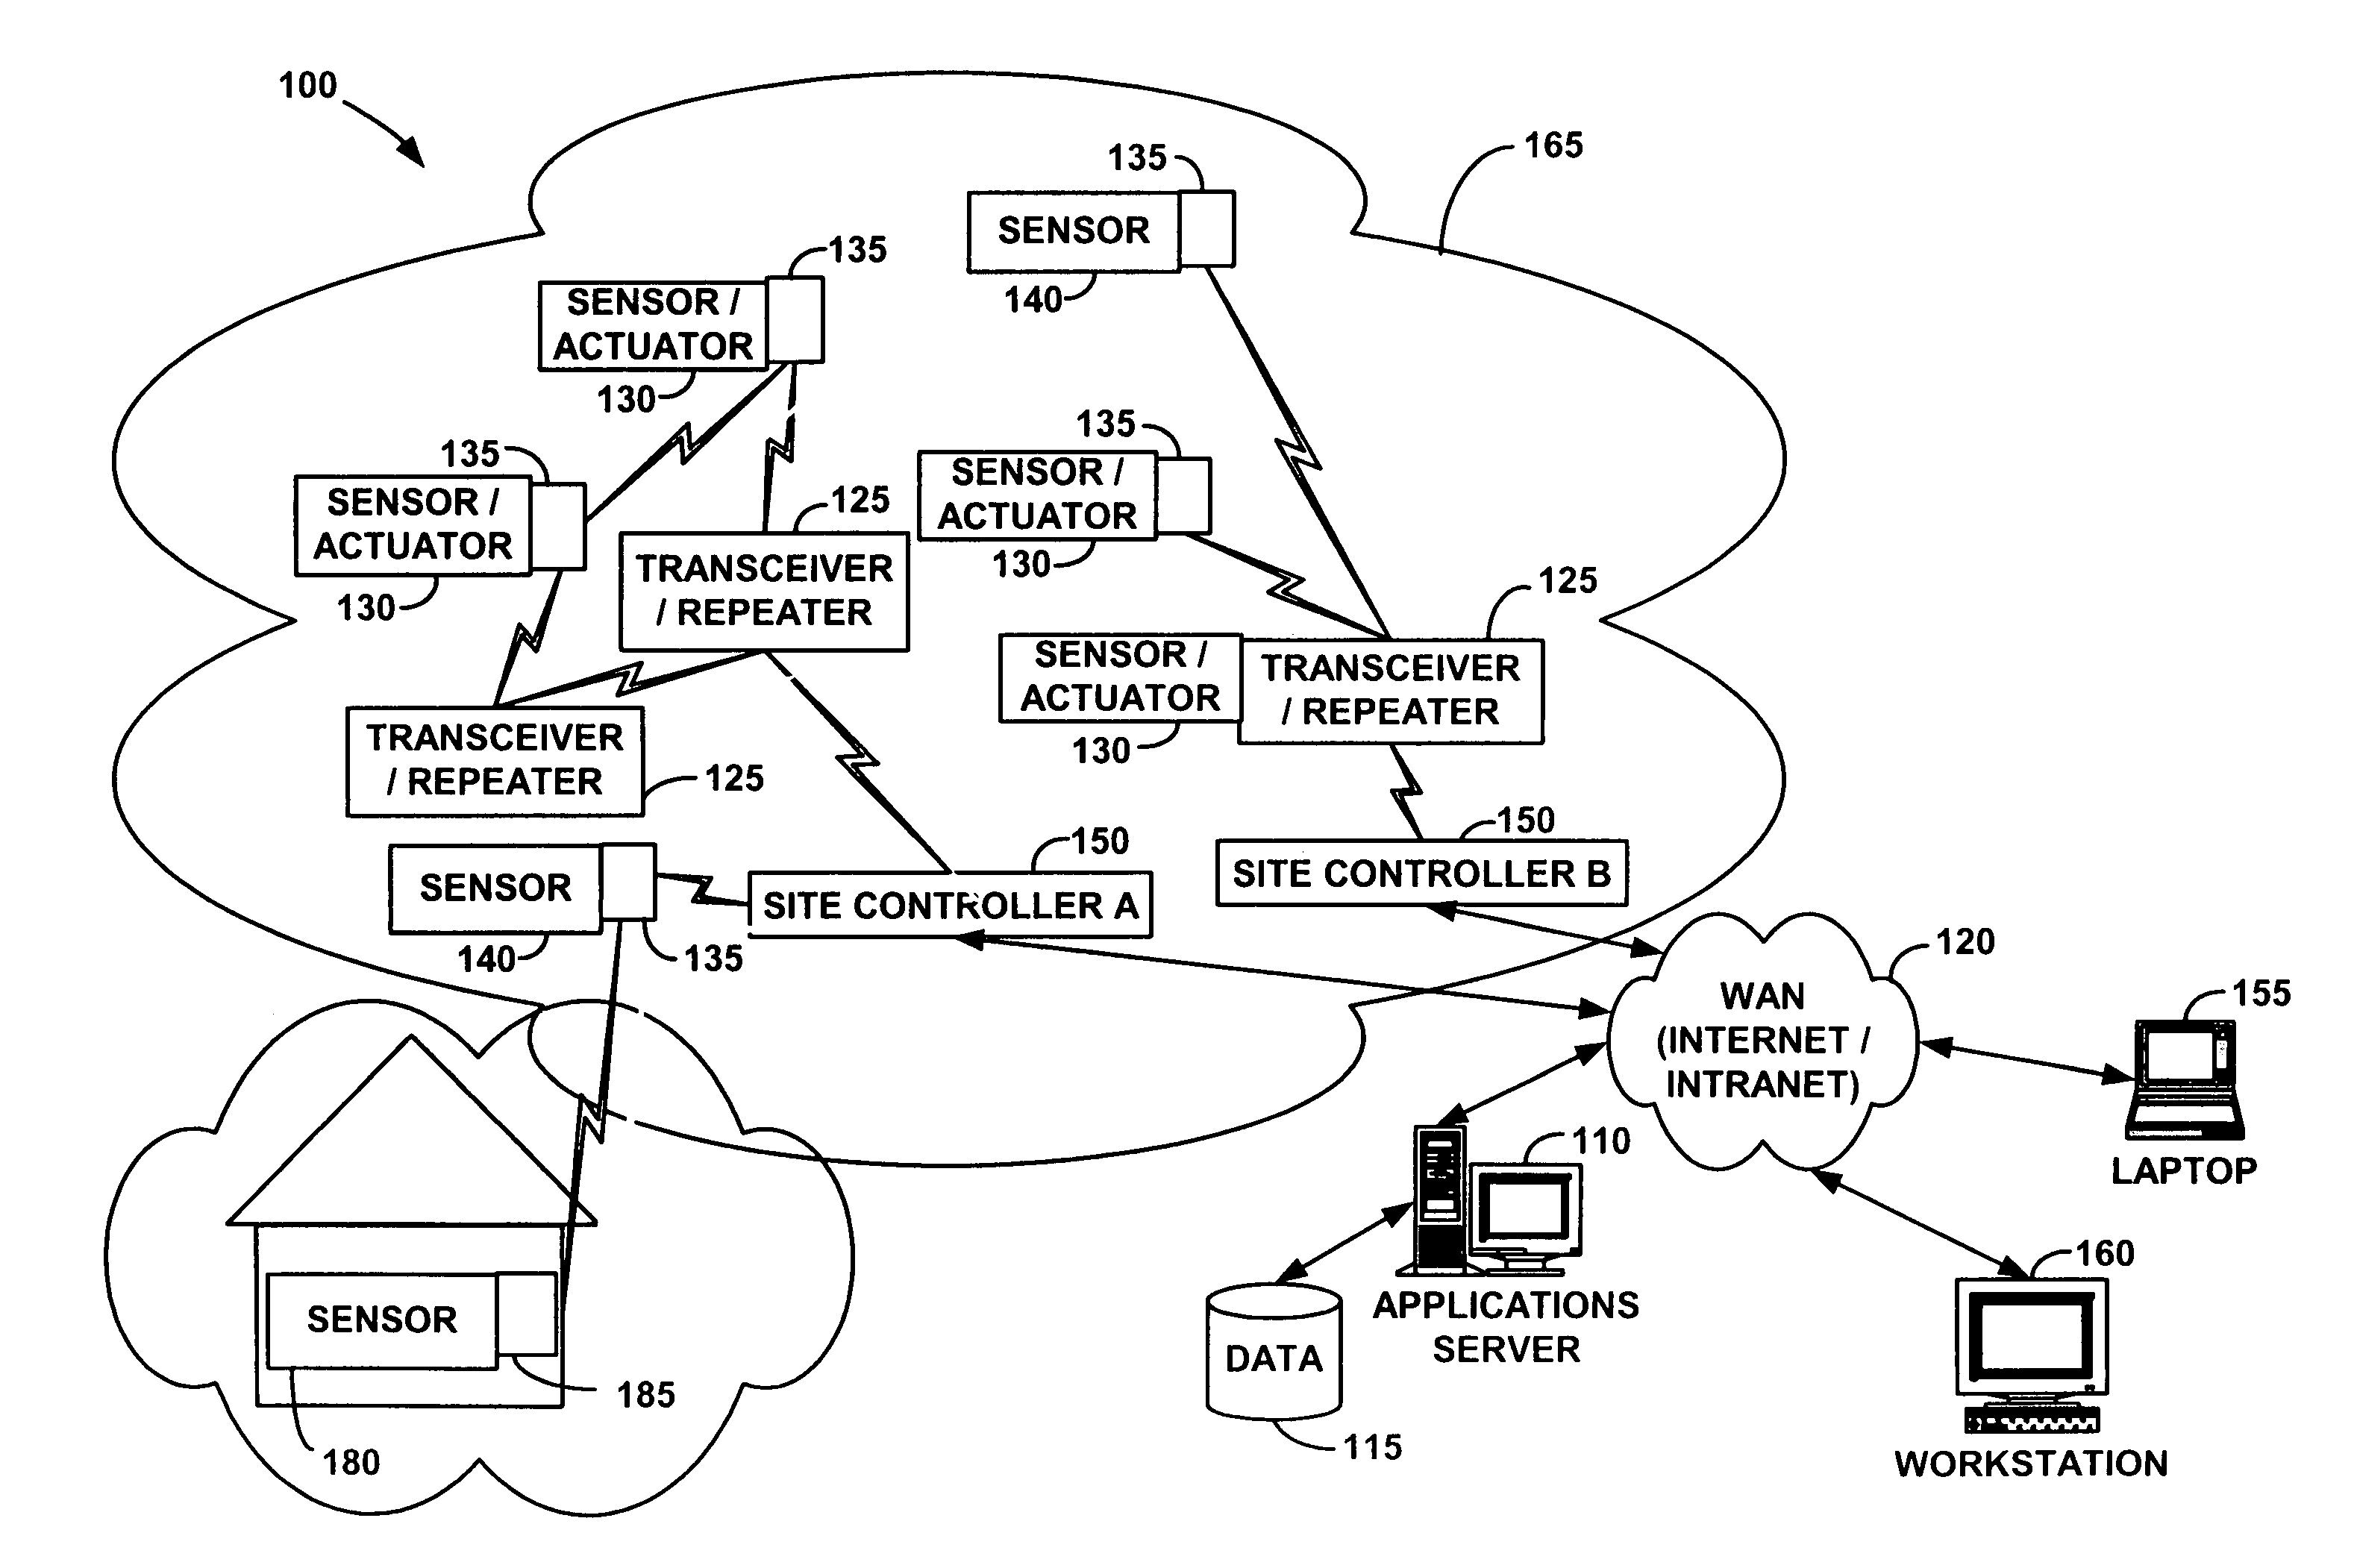 System and method for controlling communication between a host computer and communication devices associated with remote devices in an automated monitoring system